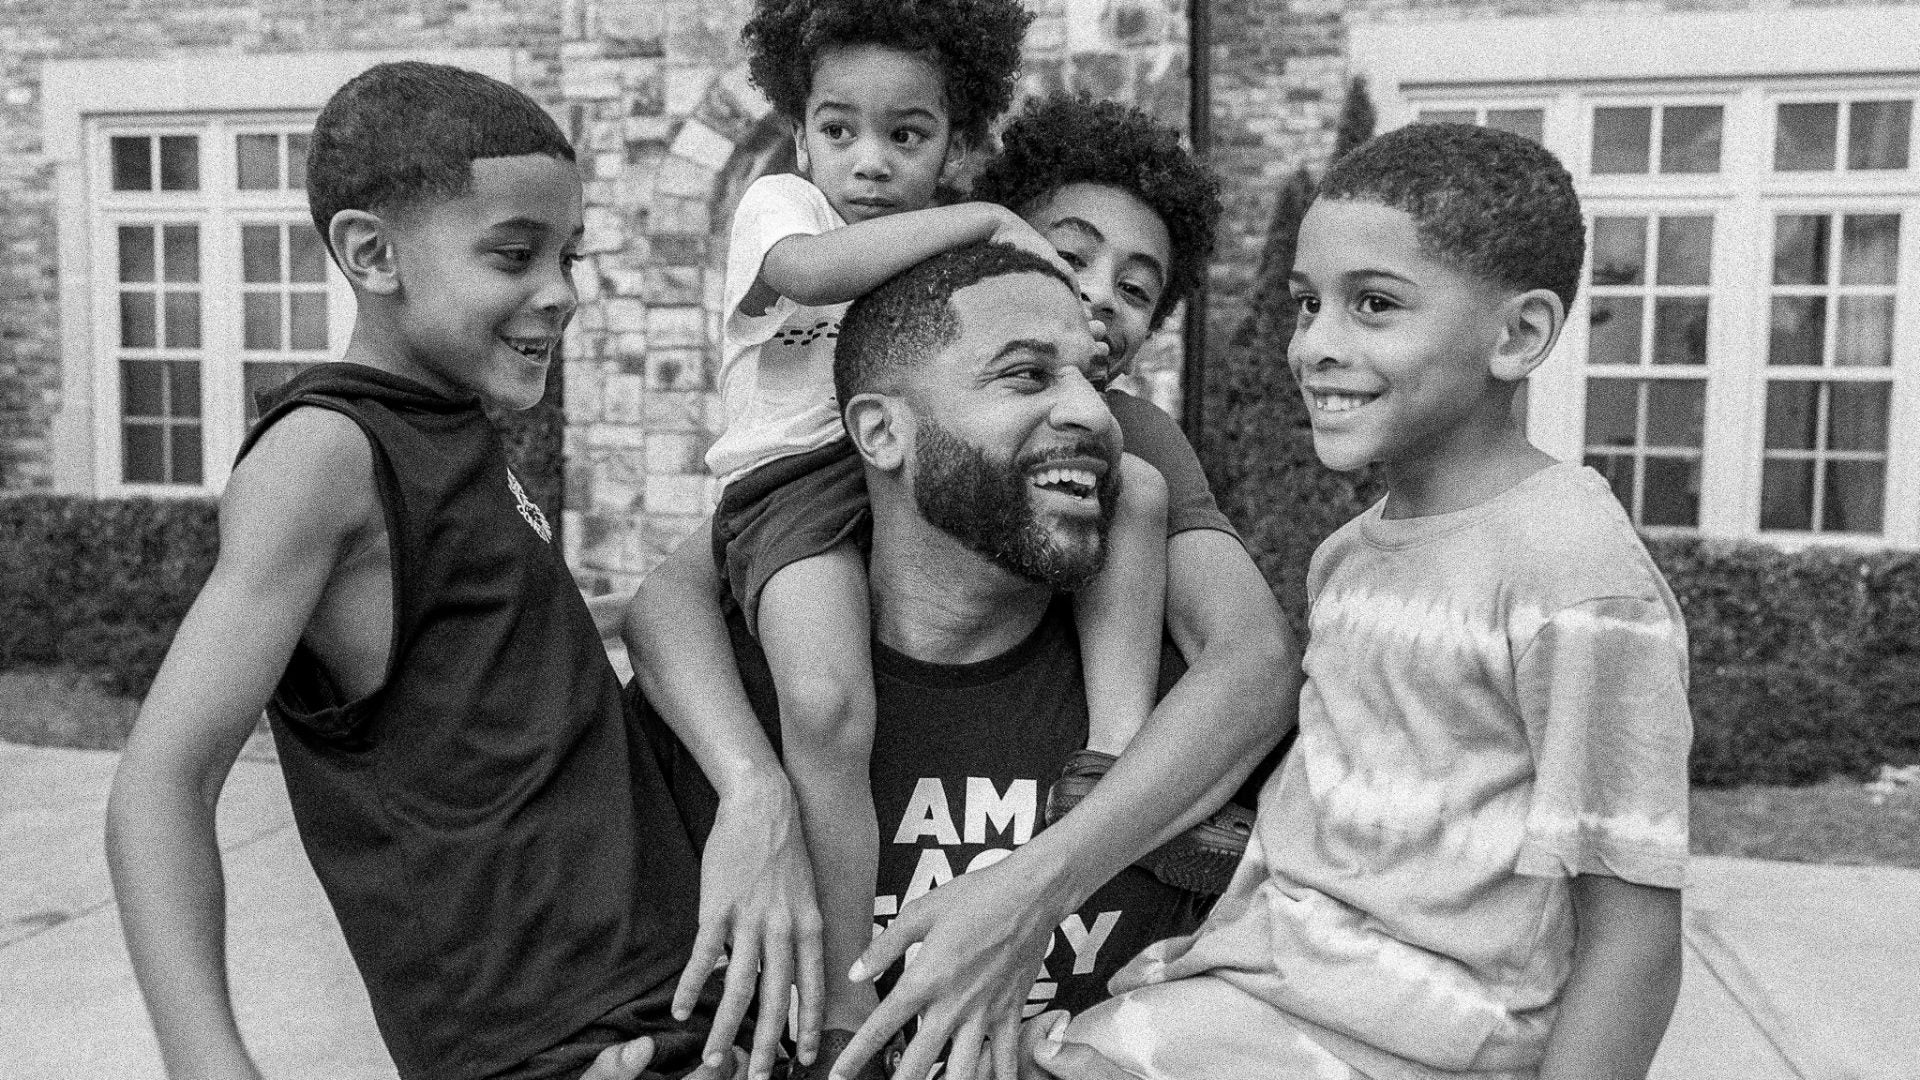 J. Alphonse, Devale Ellis, And Other Celebrity Dads Photographed For Fourth Annual 'Father Noir' Project